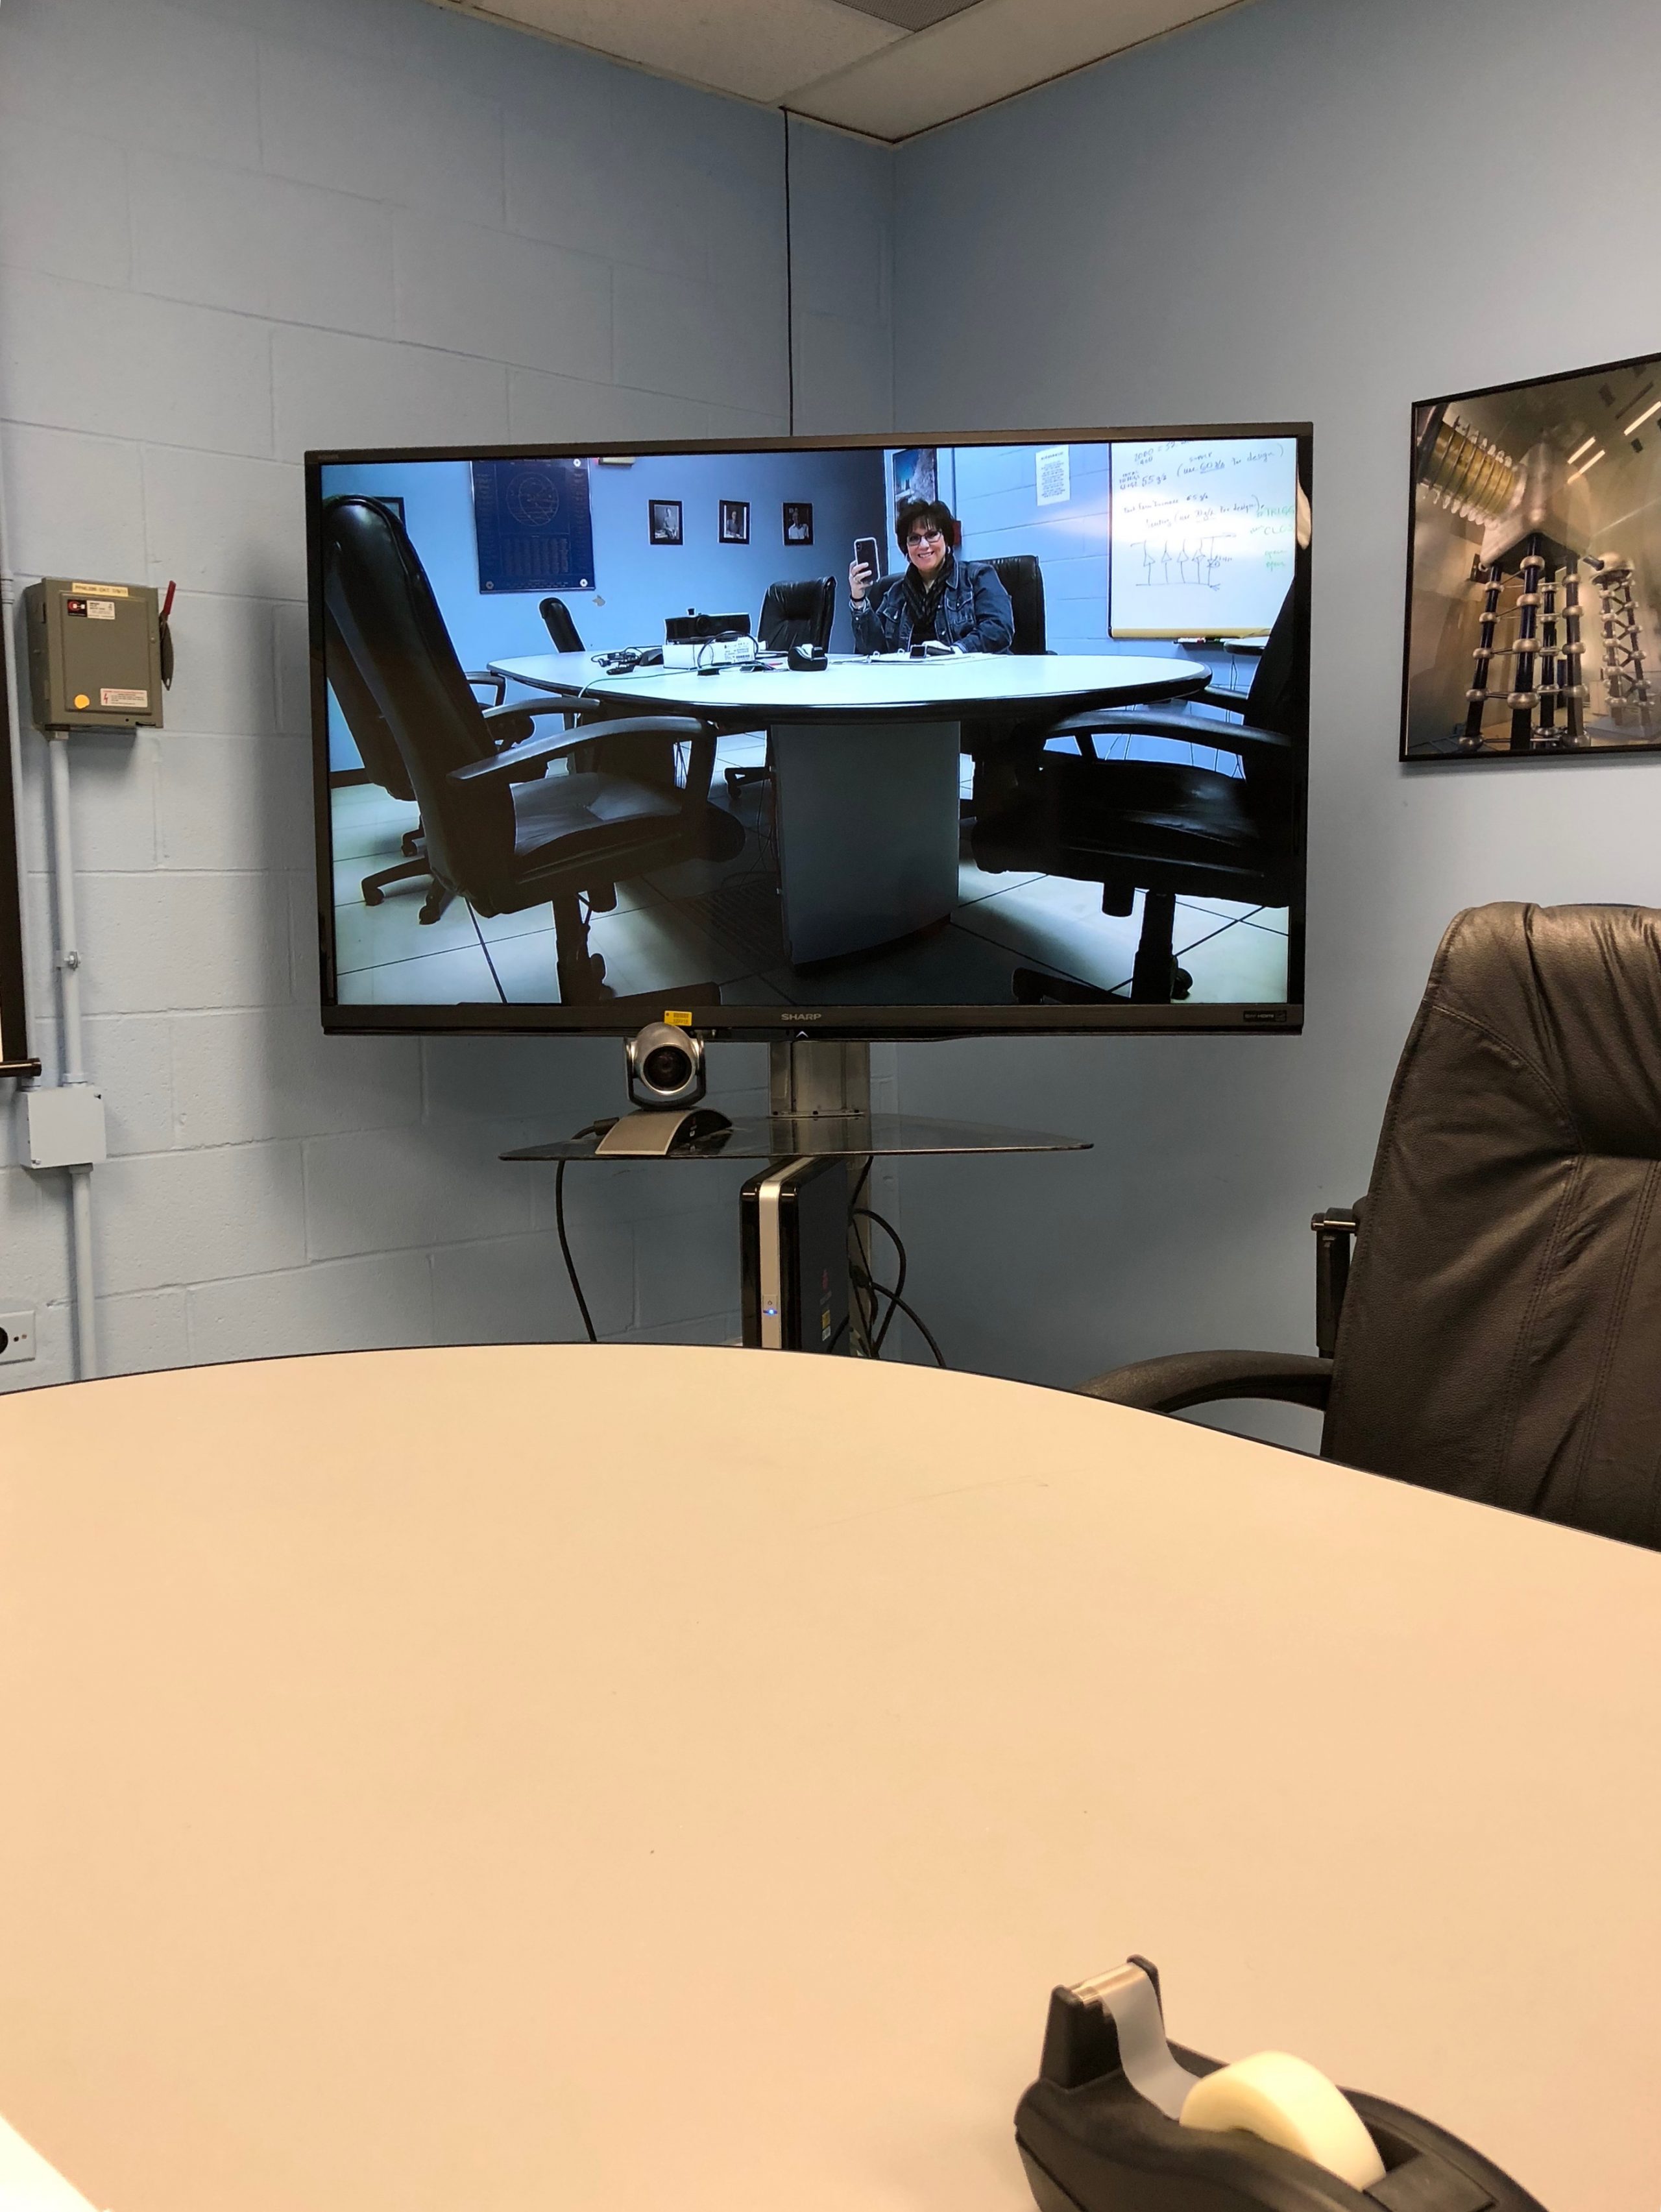 The Blue Room video conference room needed a reboot, so I, Leticia, walked over to Lab F to do so. Photo: Leticia Shaddix, people